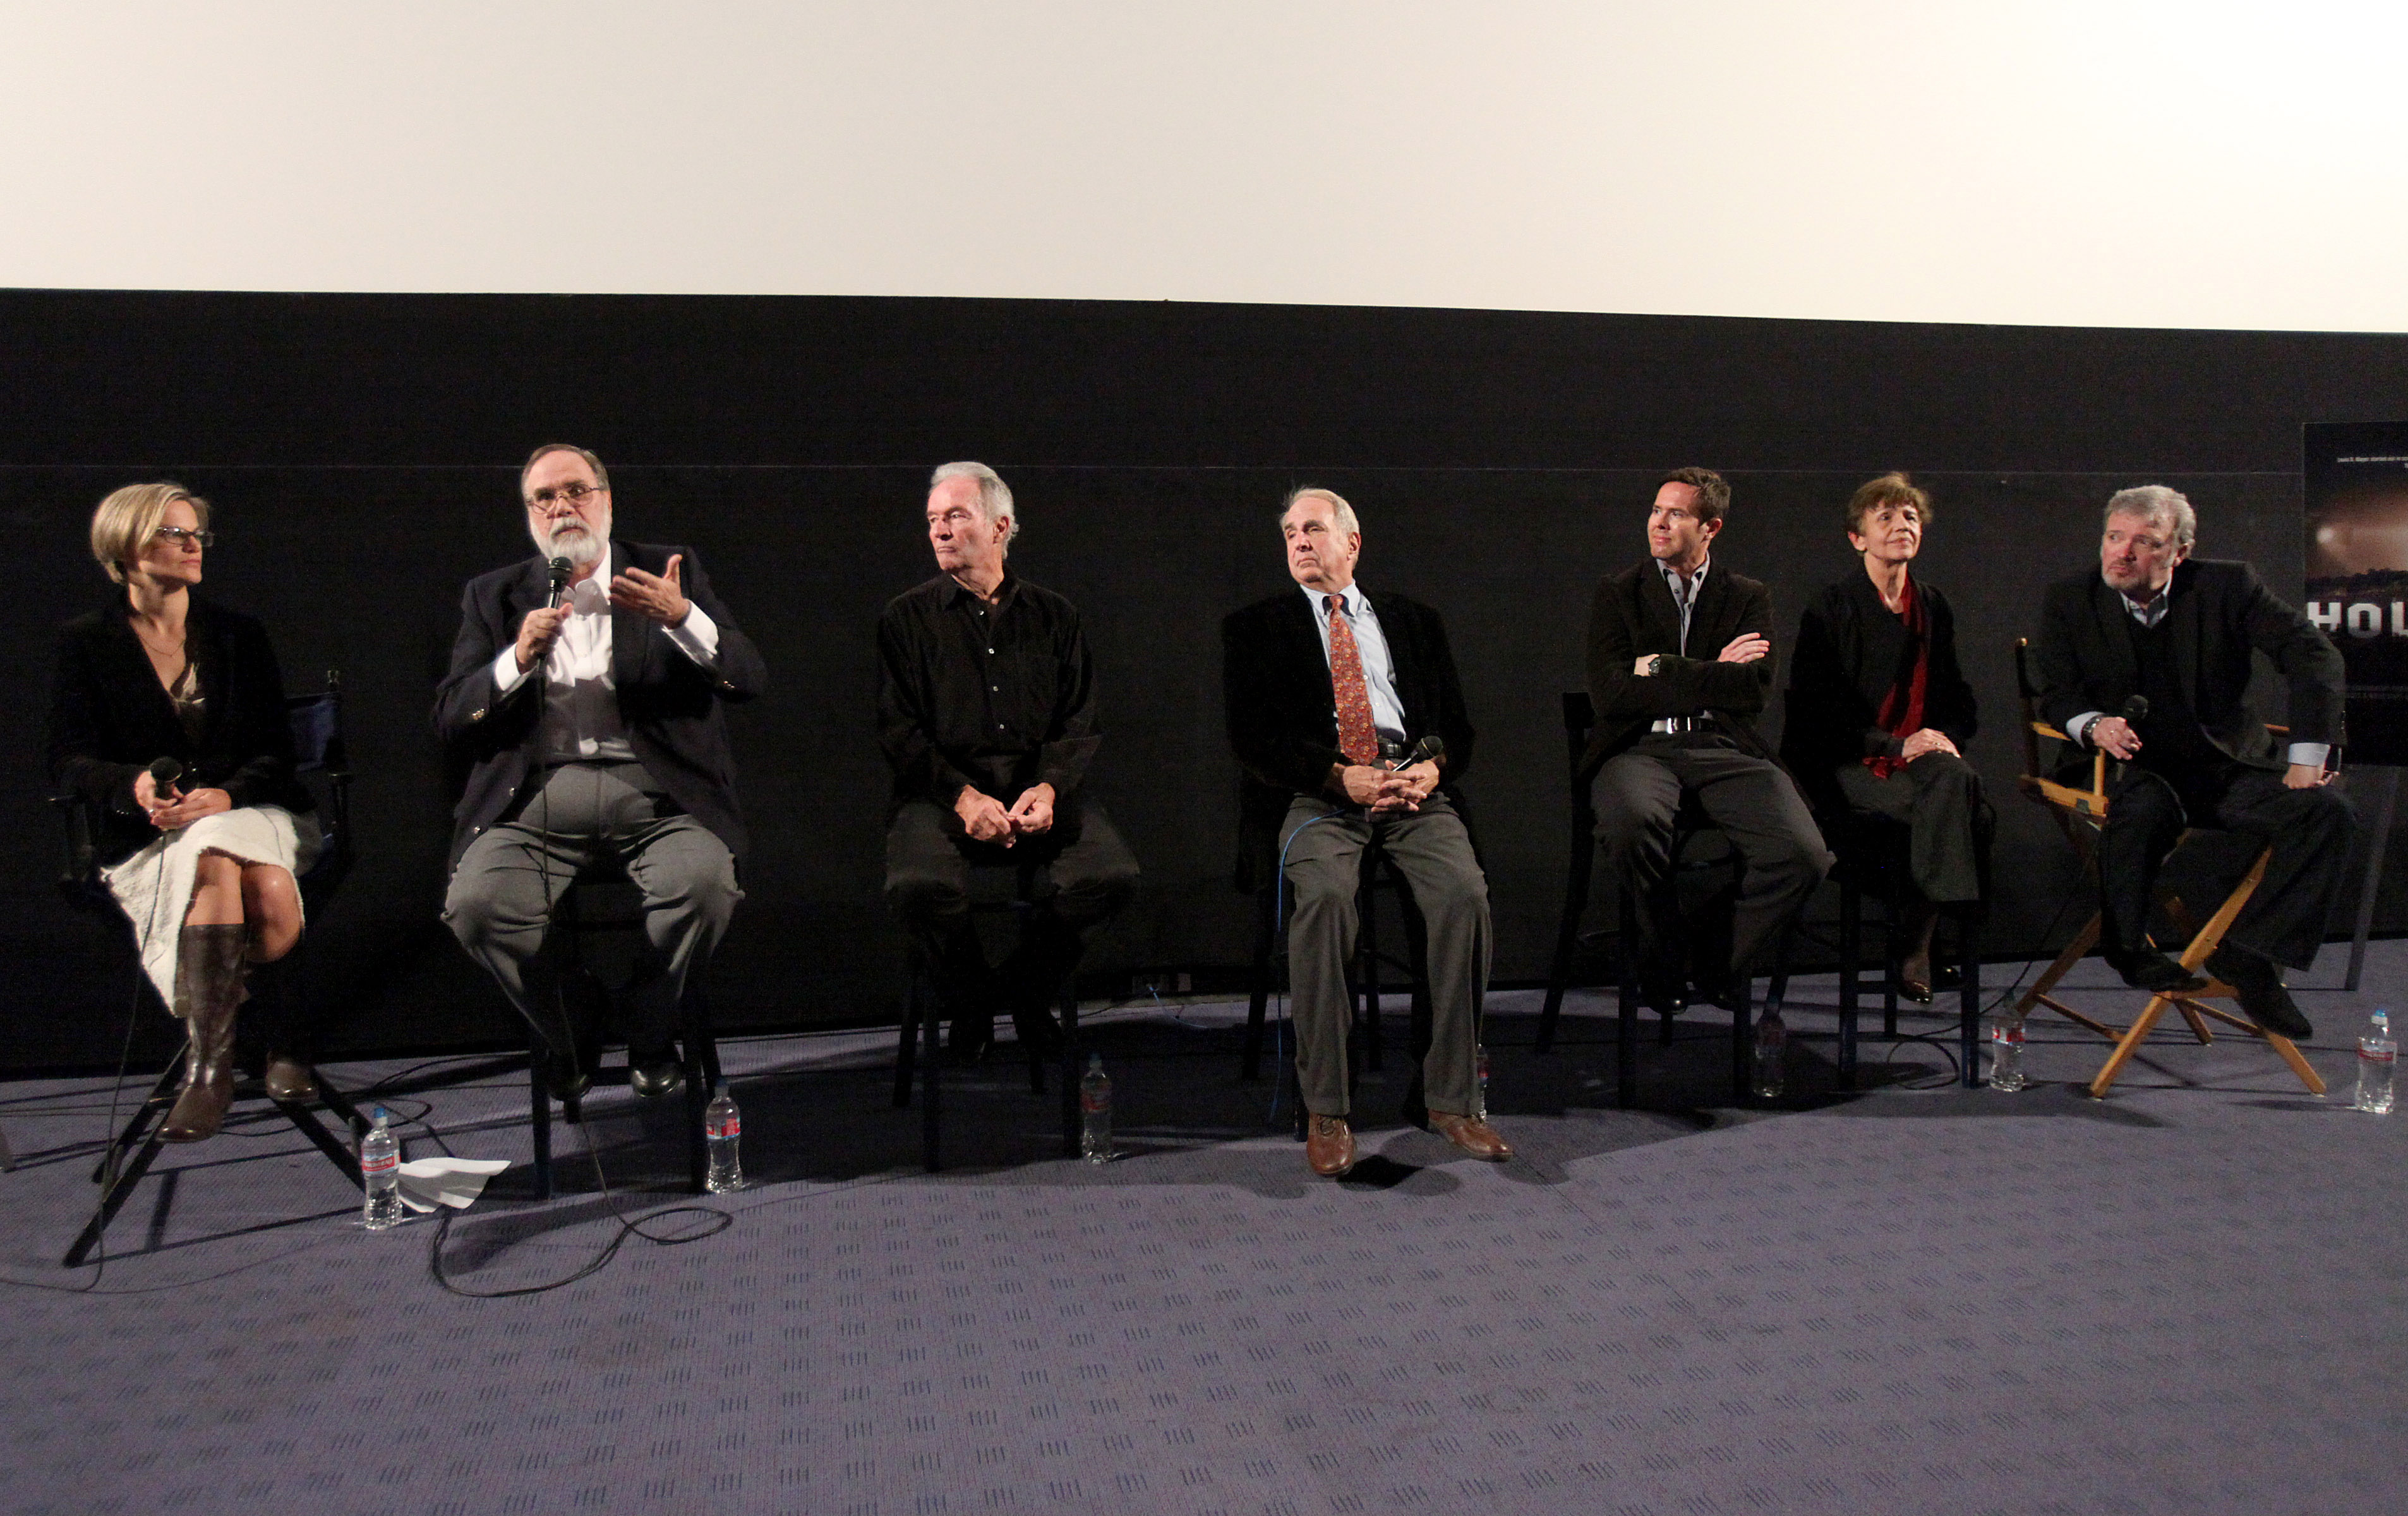 Turner Classic Movies MOGULS AND MOVIE STARS panel discussion, Egyptian Theatre, Hollywood, CA, October 26, 2010. Left to Right: Nicole La Porte (moderator), Jon Wilkman, William Wellman, Jr., Daniel Selznick, Jeffrey Vance, Mollie Gregory, and Tom Brown.